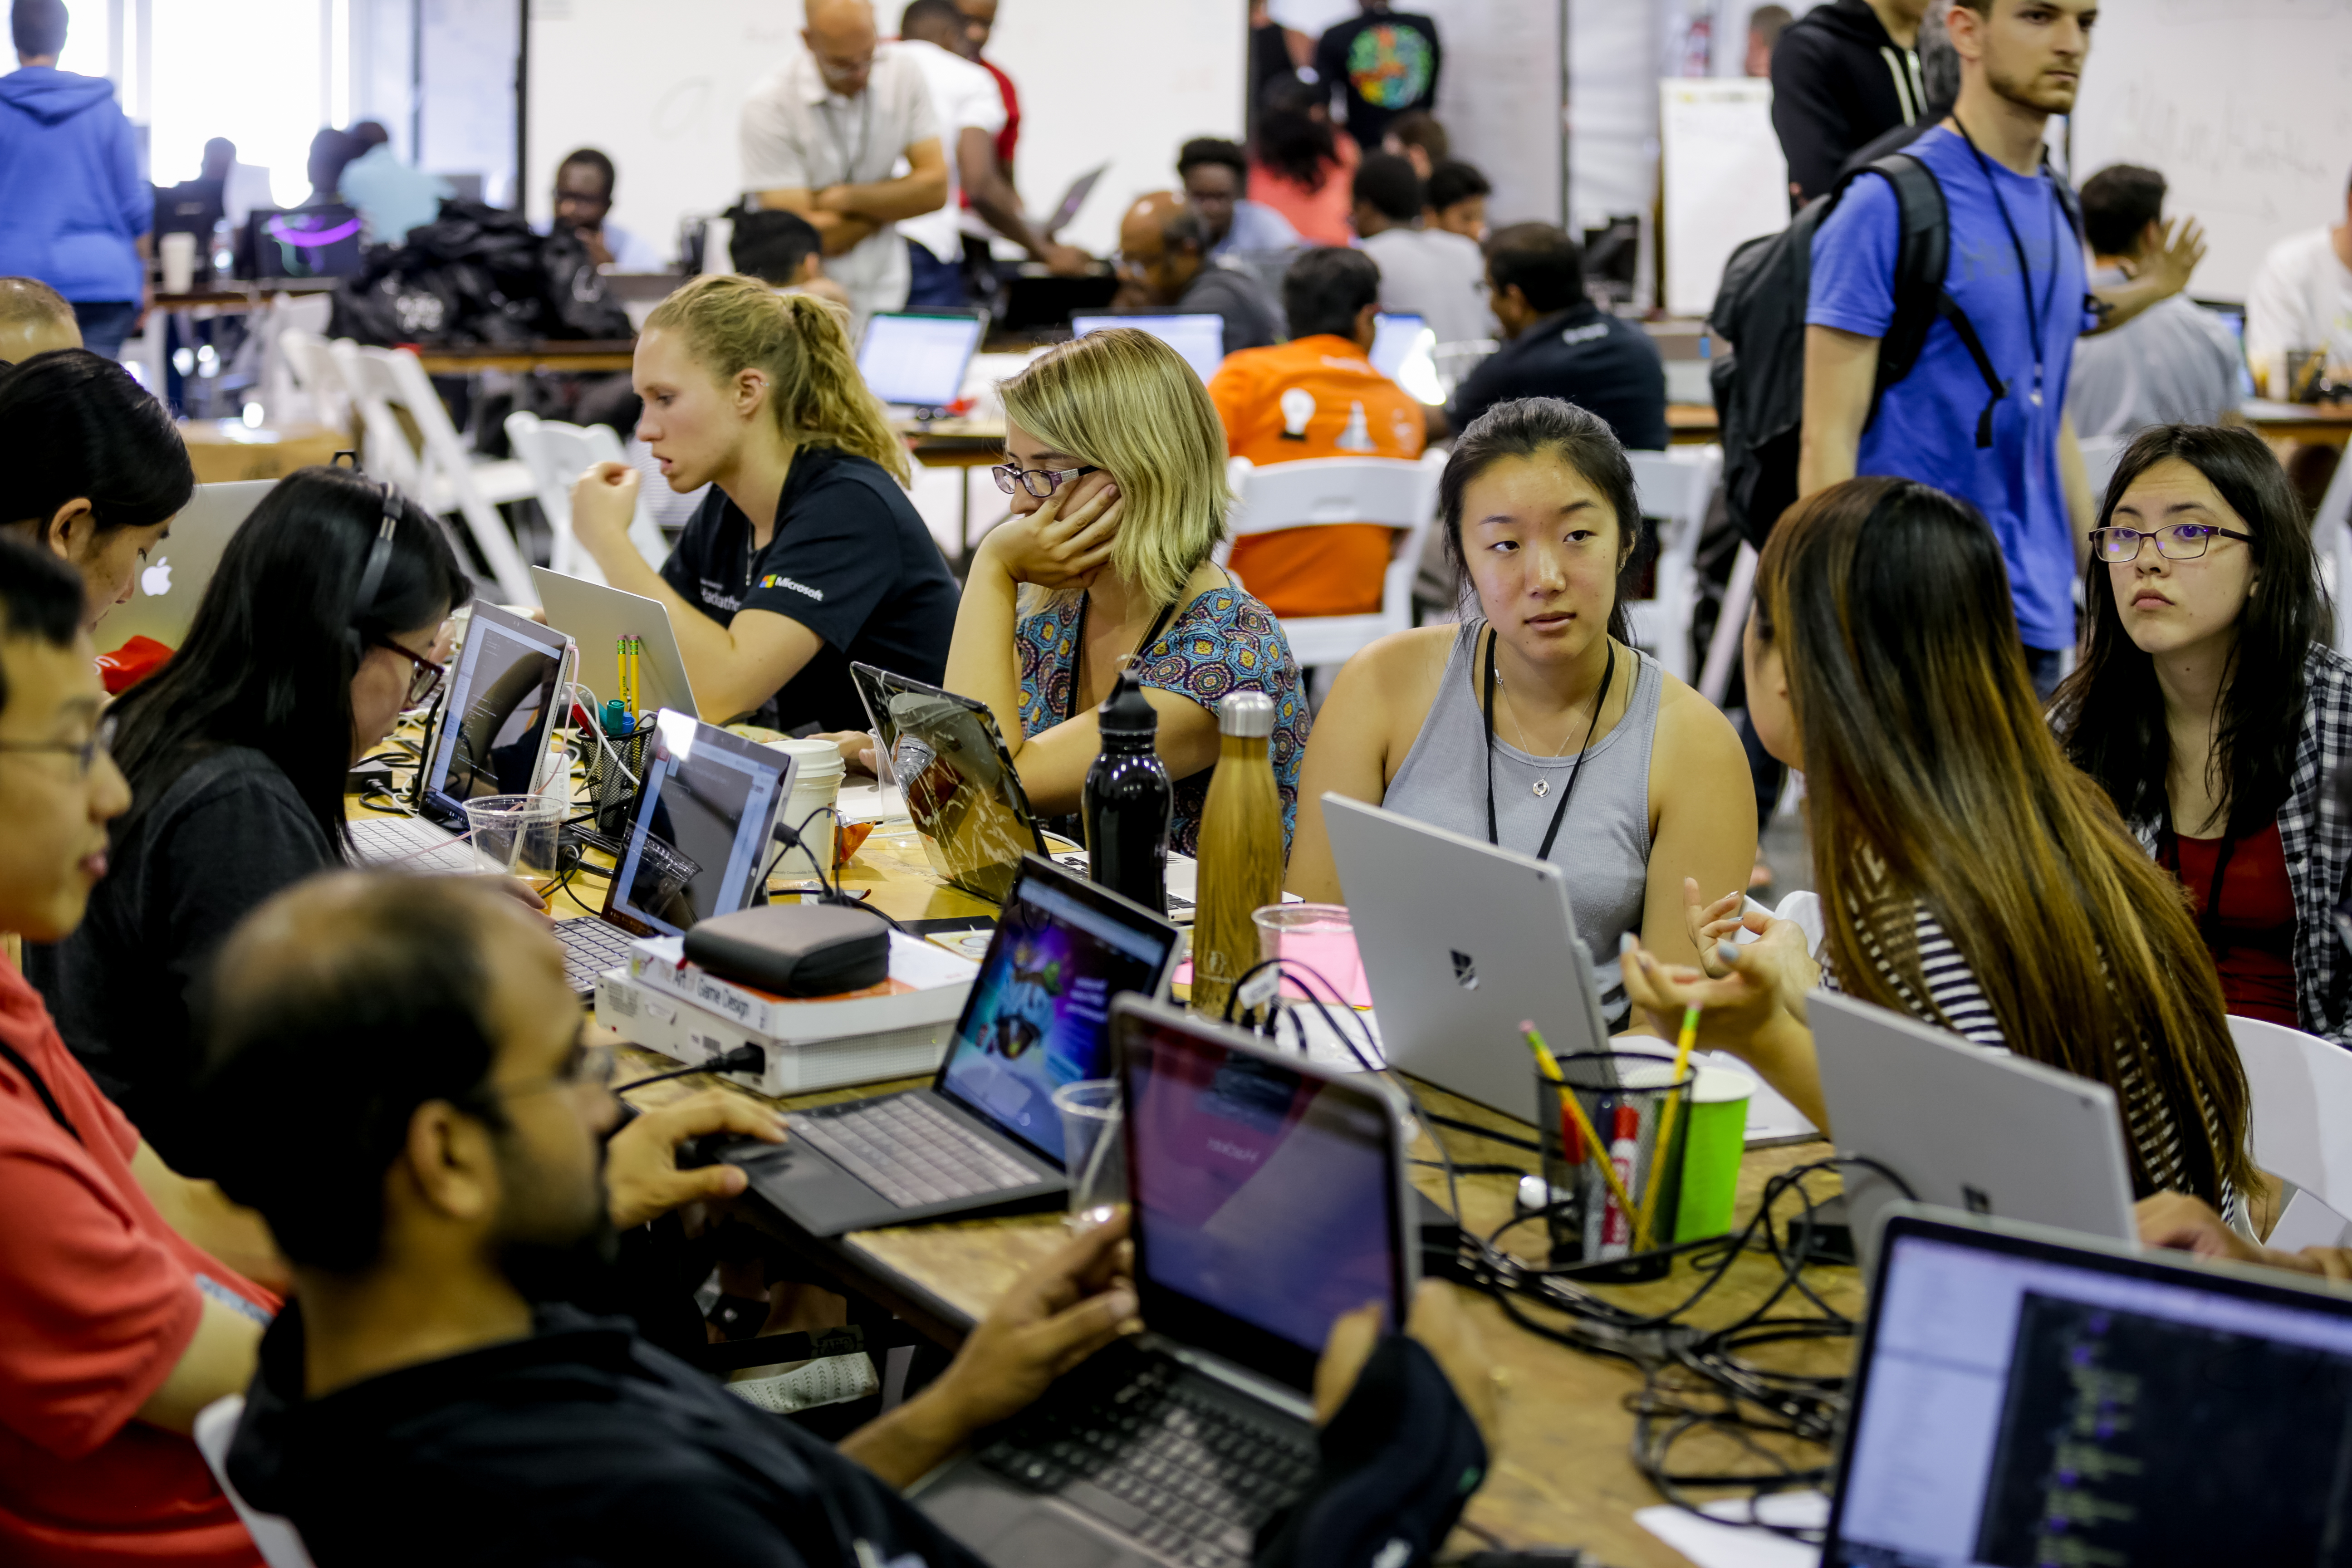 A group of Hackathon participants sit at long tables, staring at laptop screens or talking to each other in small groups.